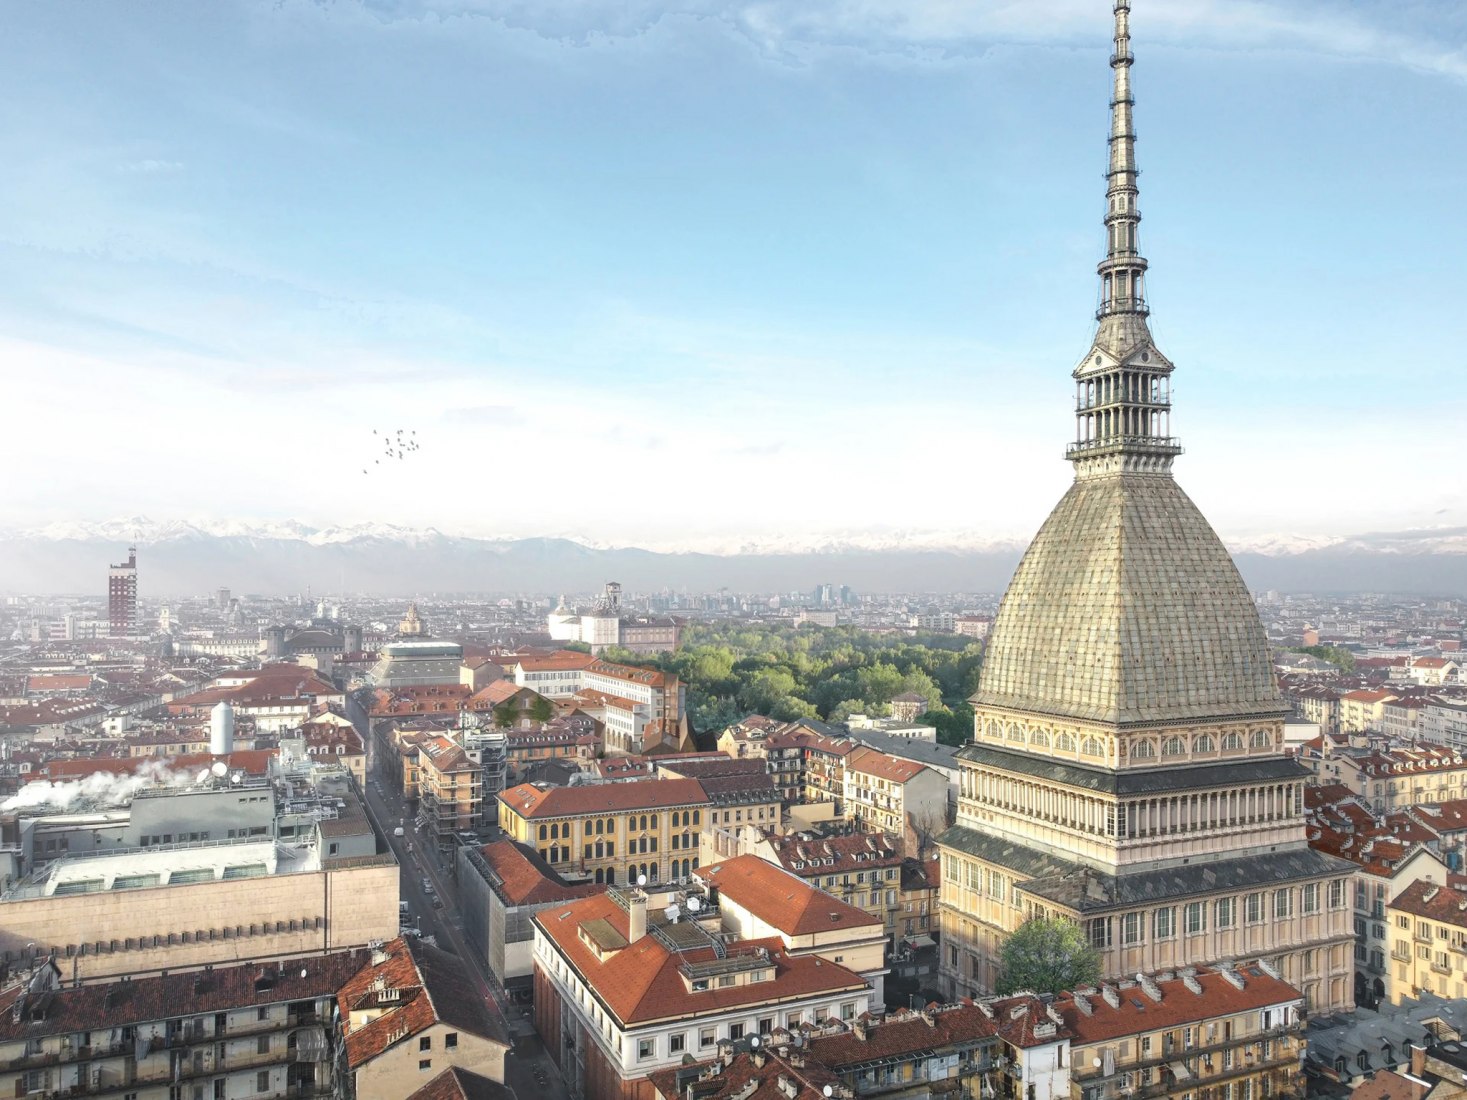 Rendering. Renovation of the Cavallerizza Reale in Turin by Cino Zucchi. Image by WOLF Visualization Agency